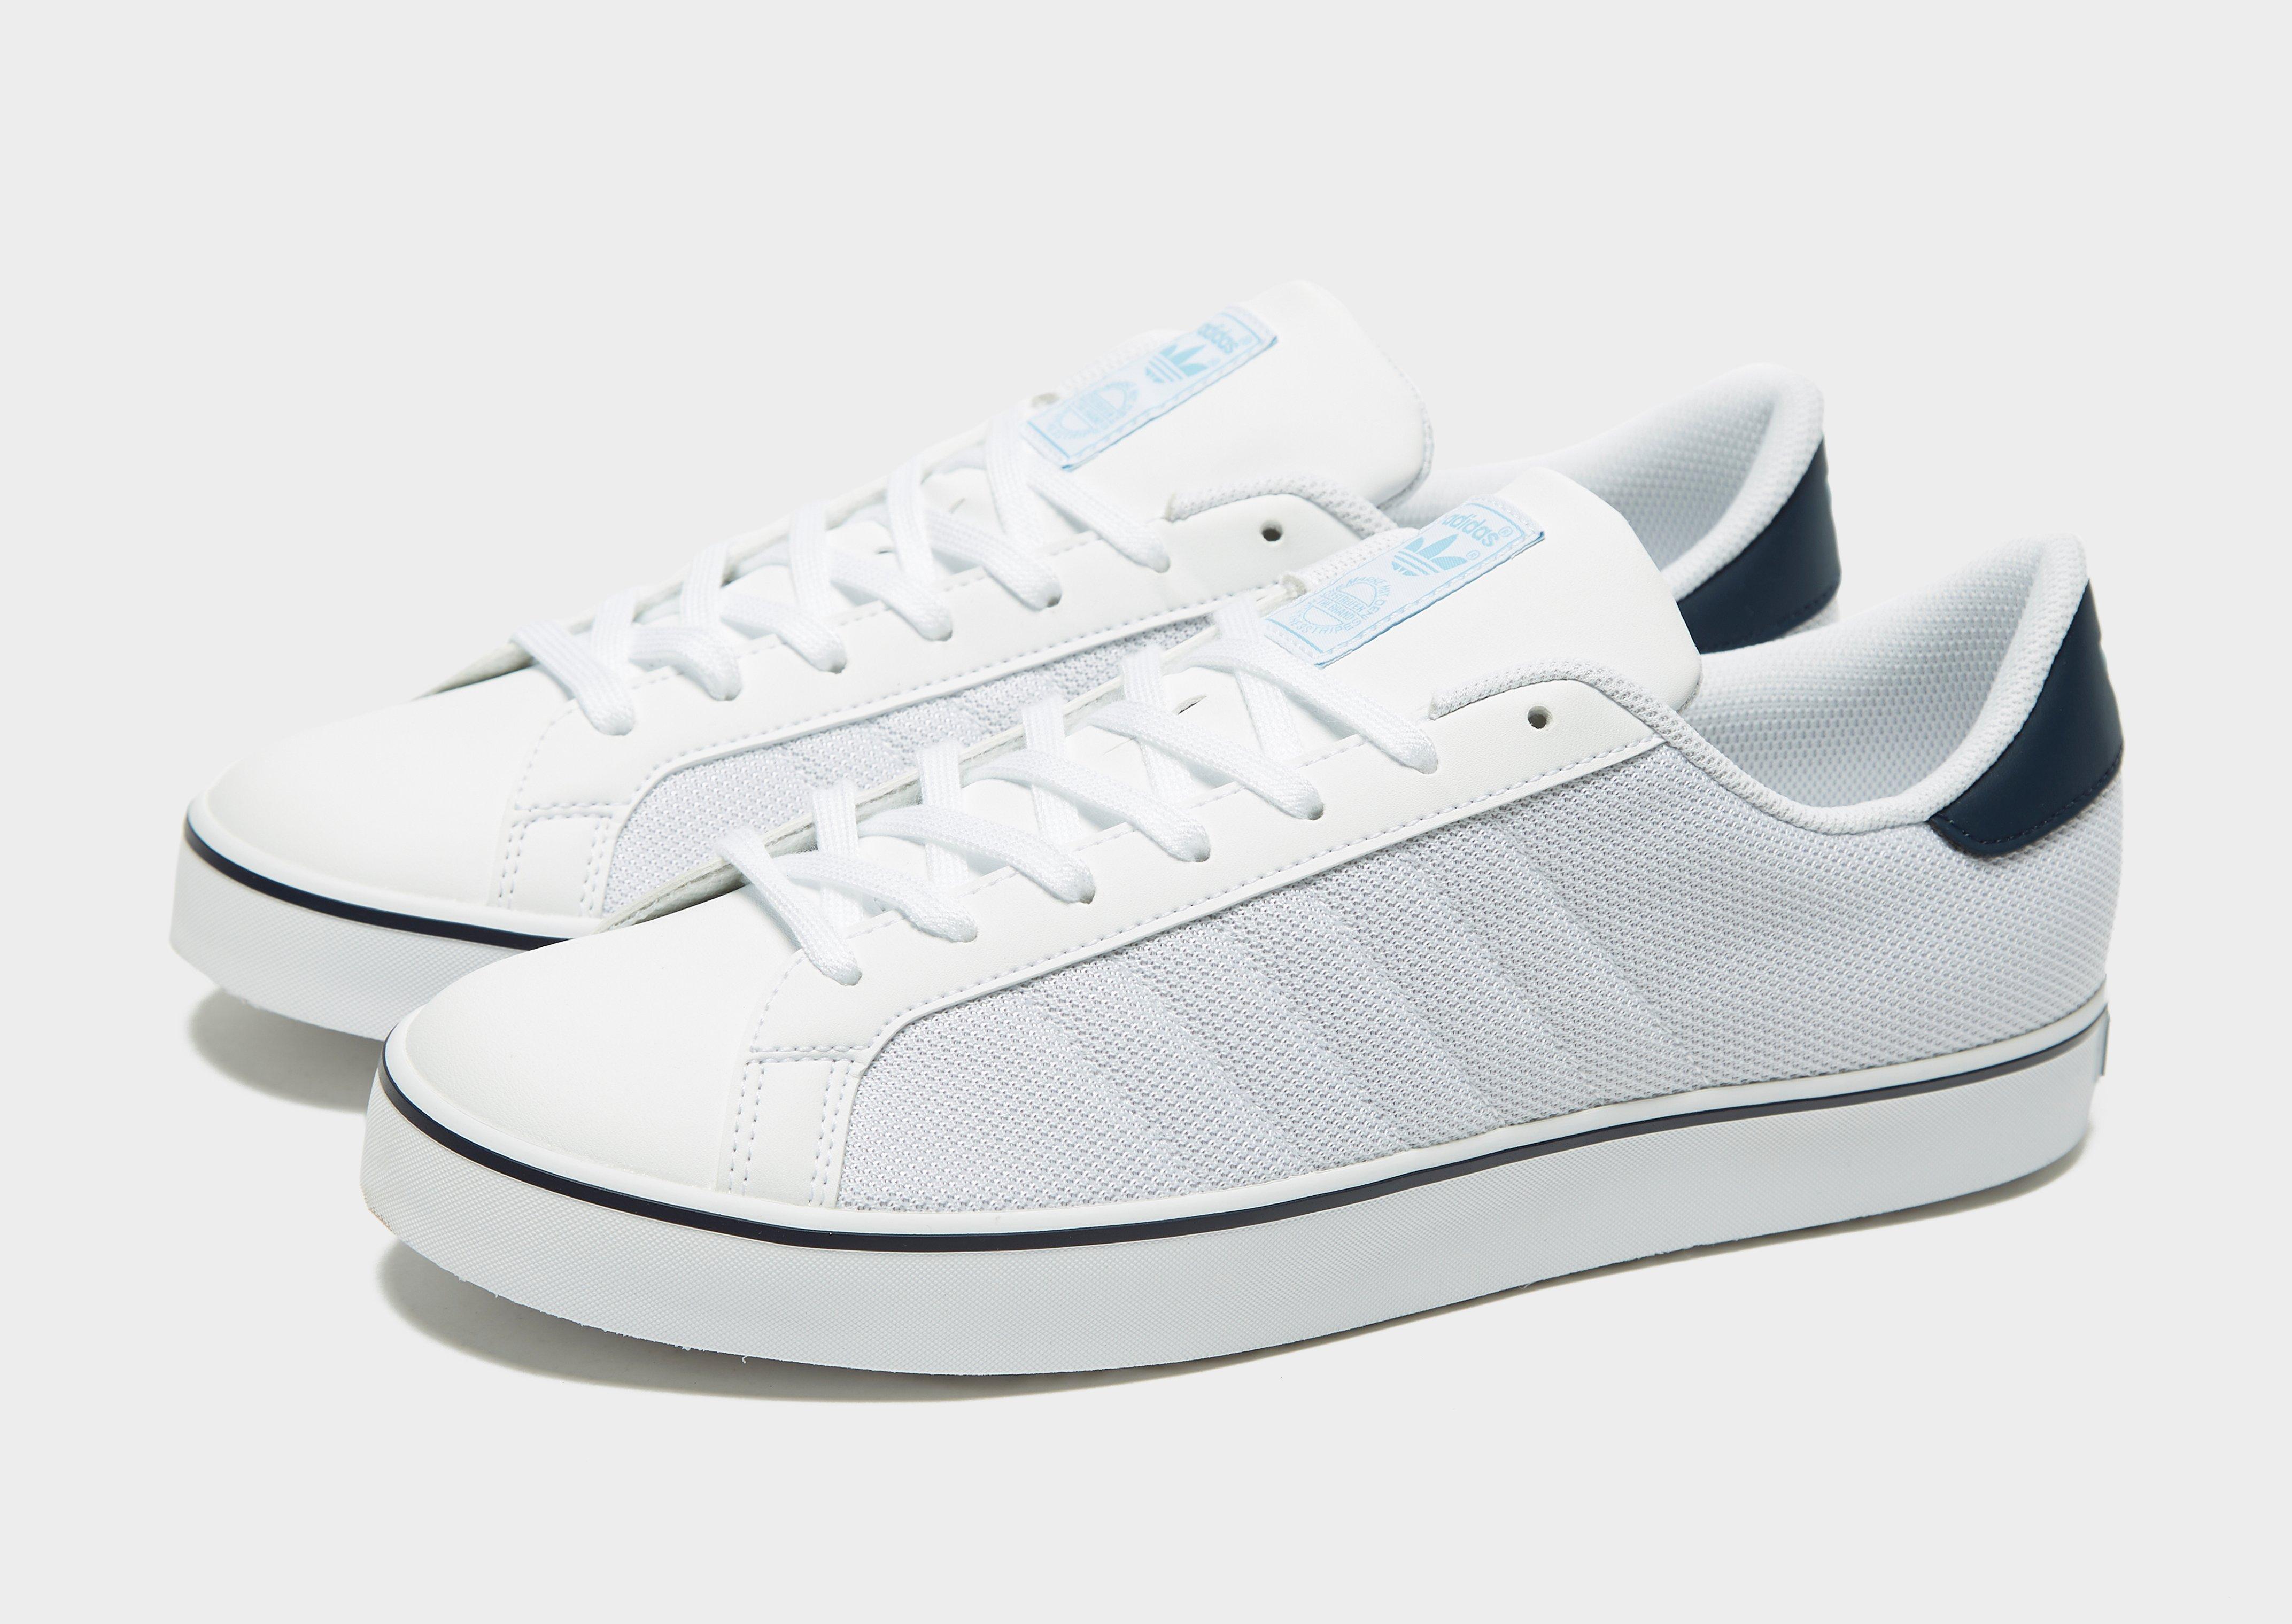 rod laver trainers